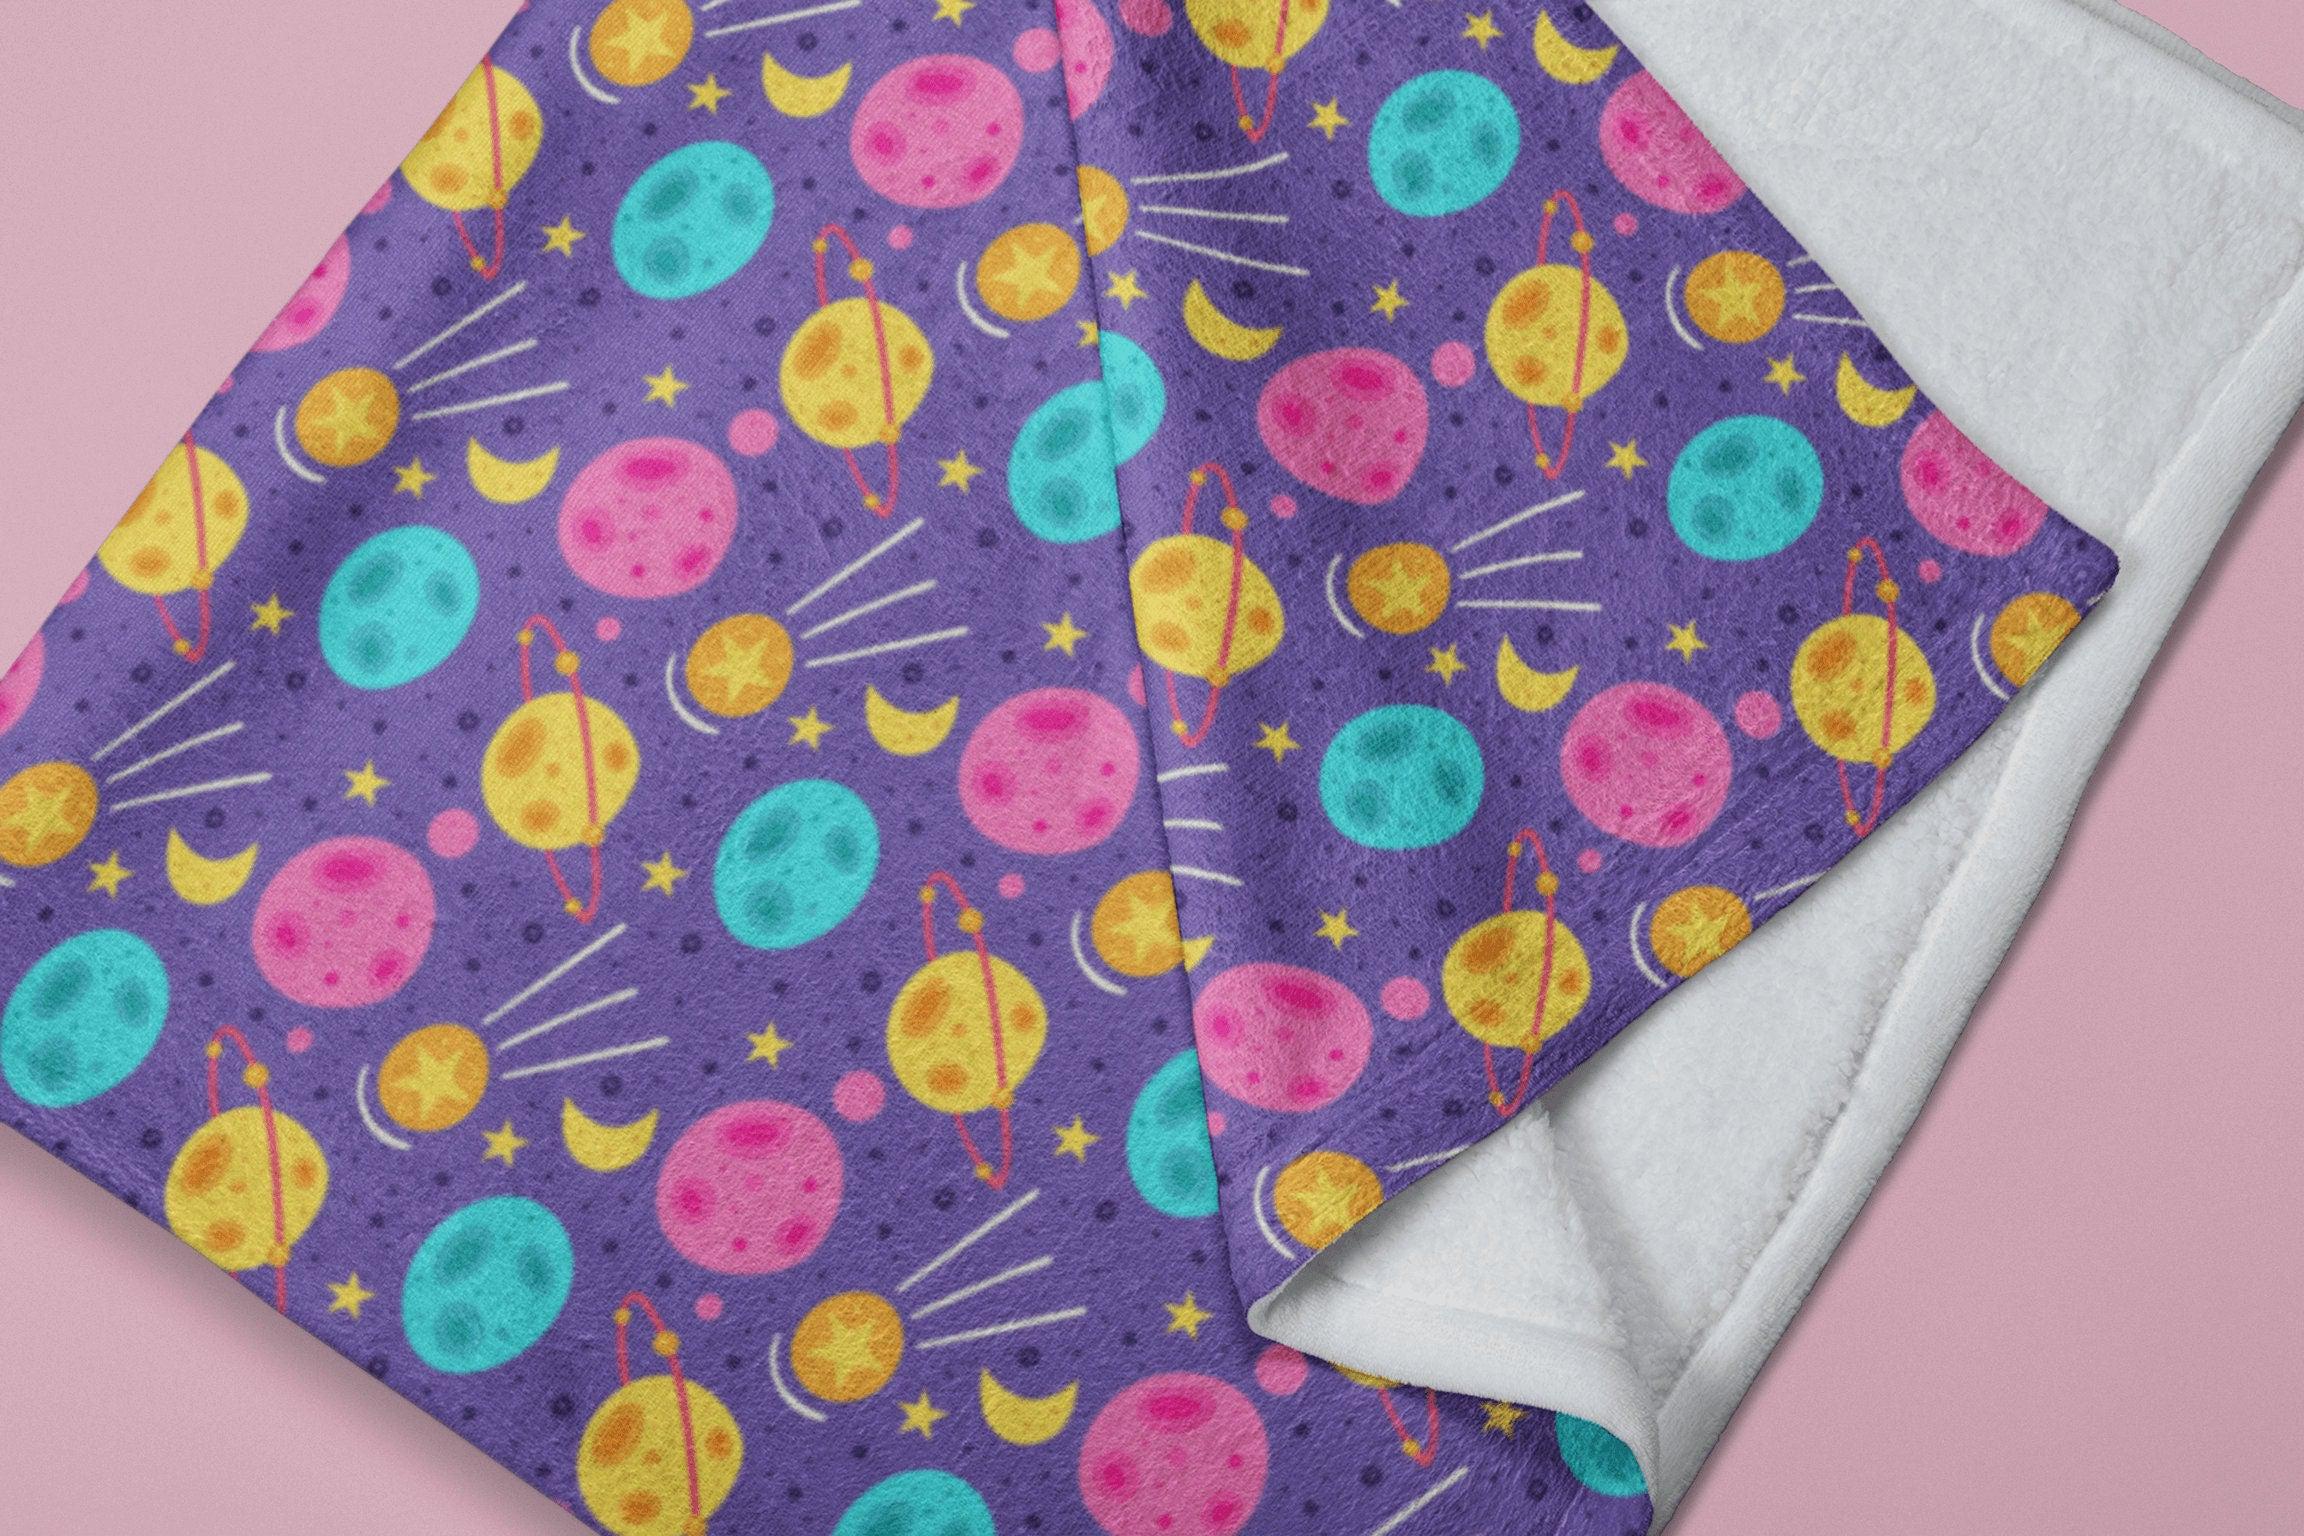 daintyduvet Space Galaxy Planets Comets Moon Soft Fluffy Velvet Flannel Fleece Throw Blanket